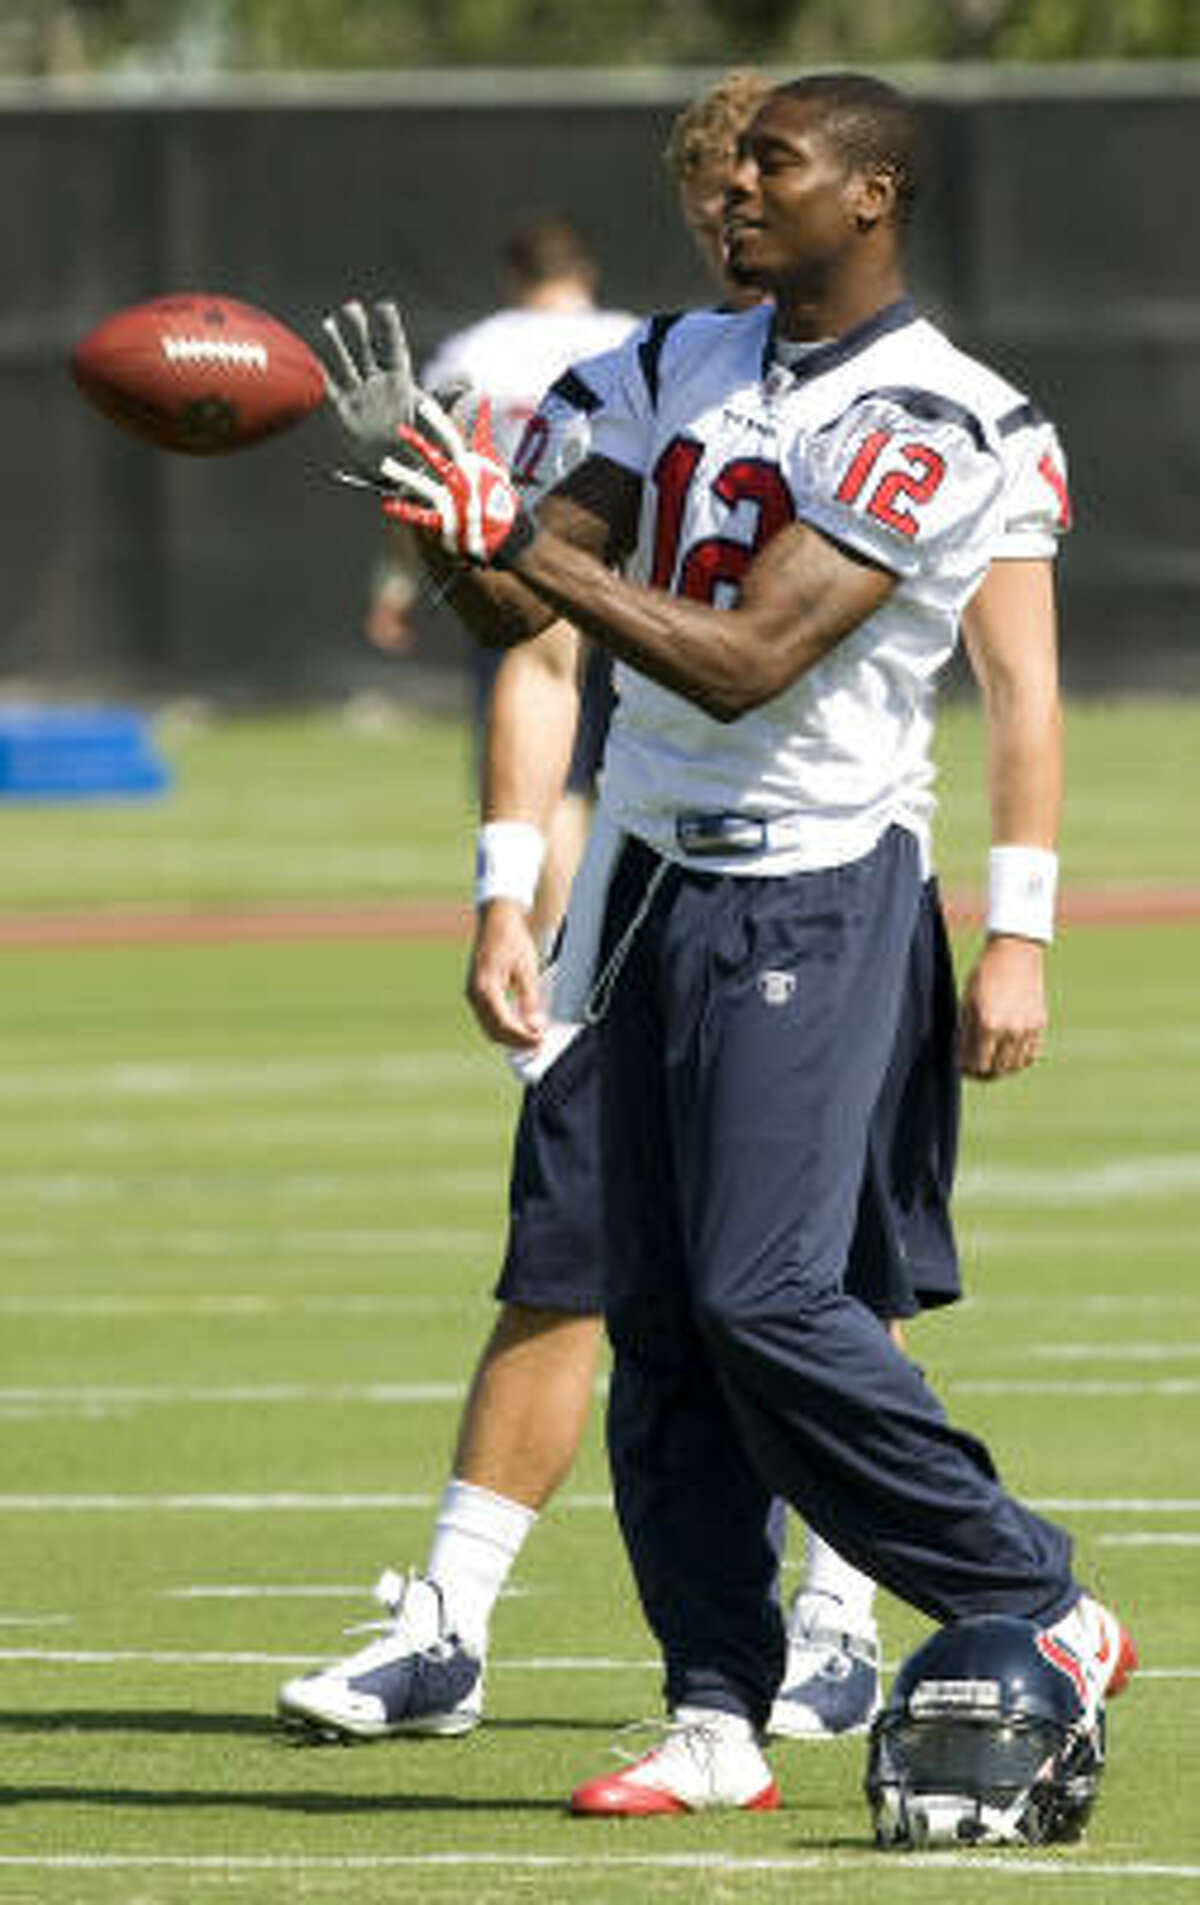 Texans wide receiver Jacoby Jones catches a football during warm-ups.